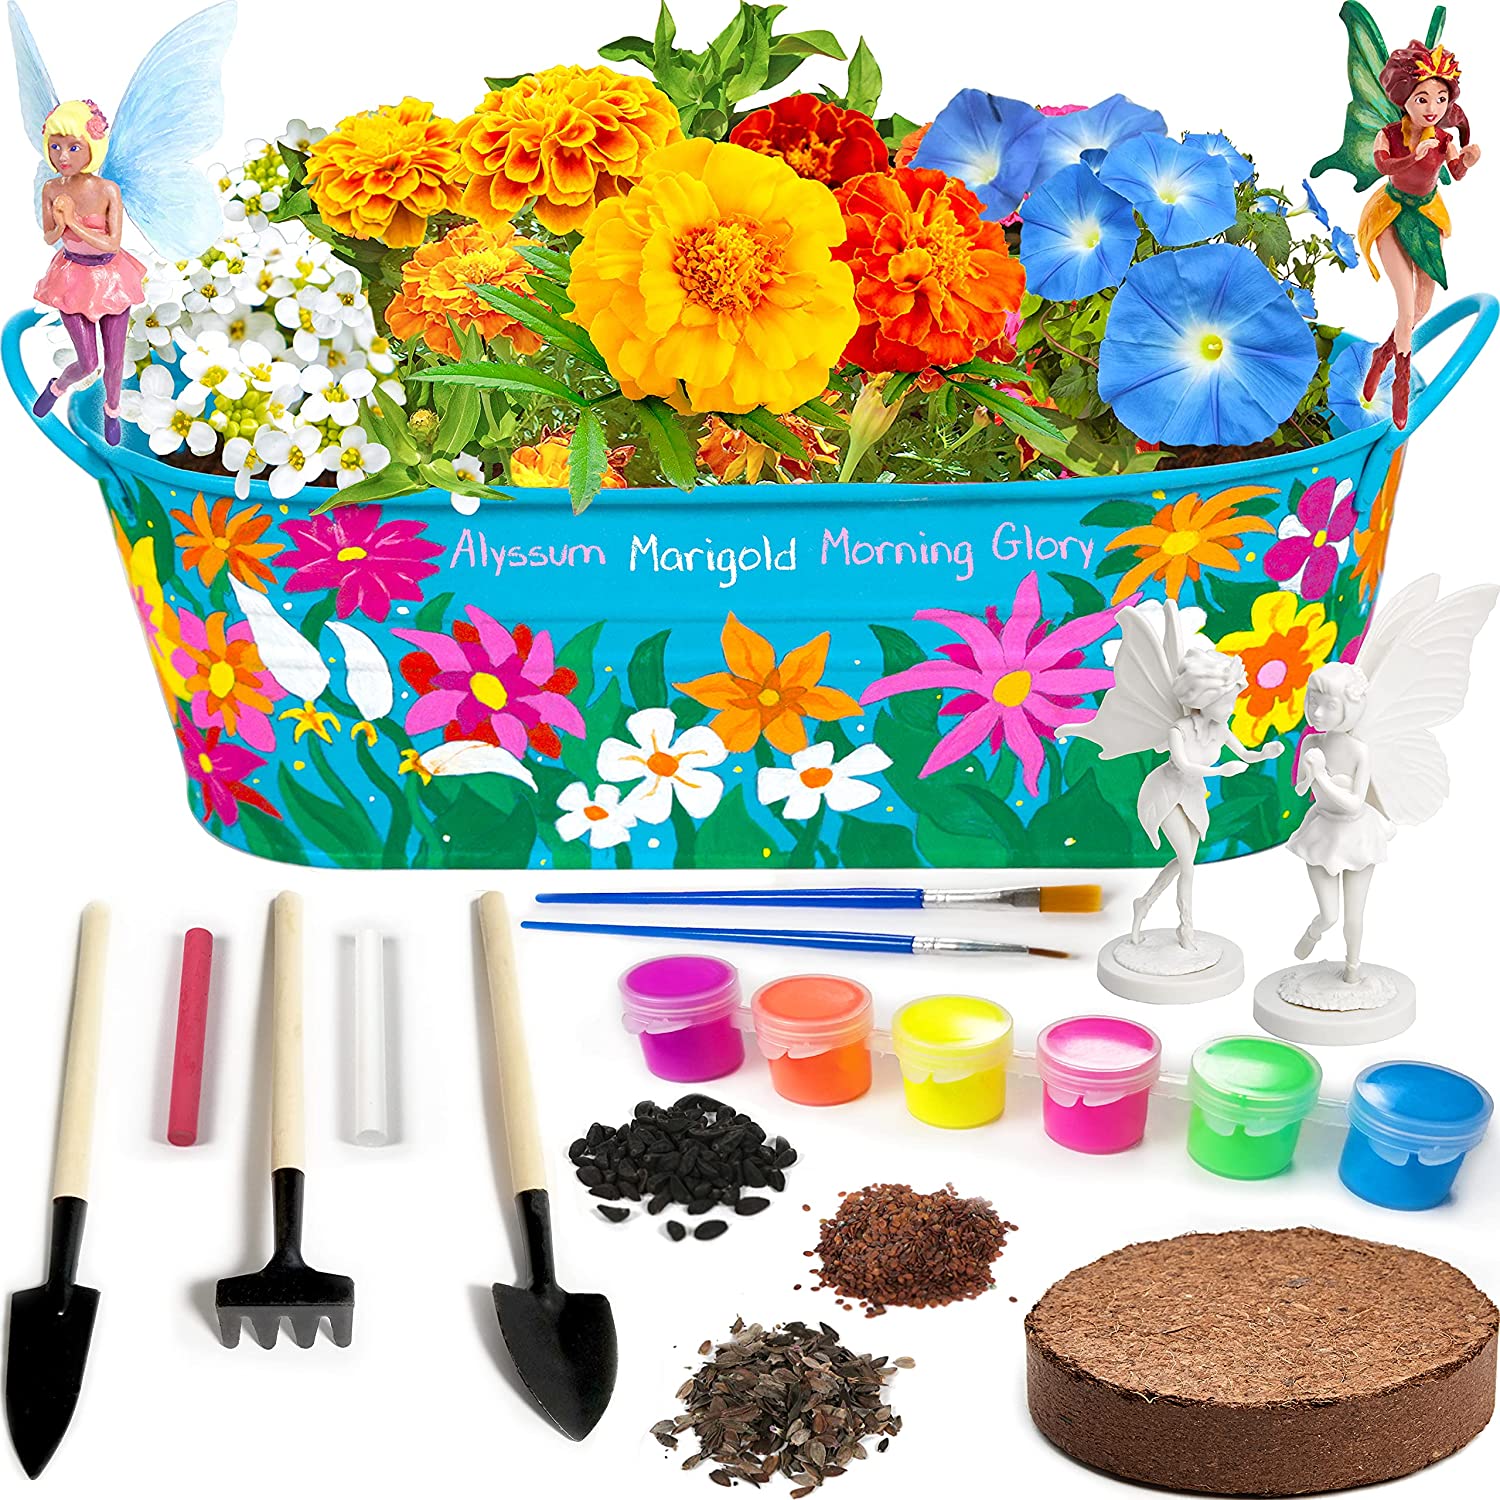 mothers-day-gardening-gifts-trough